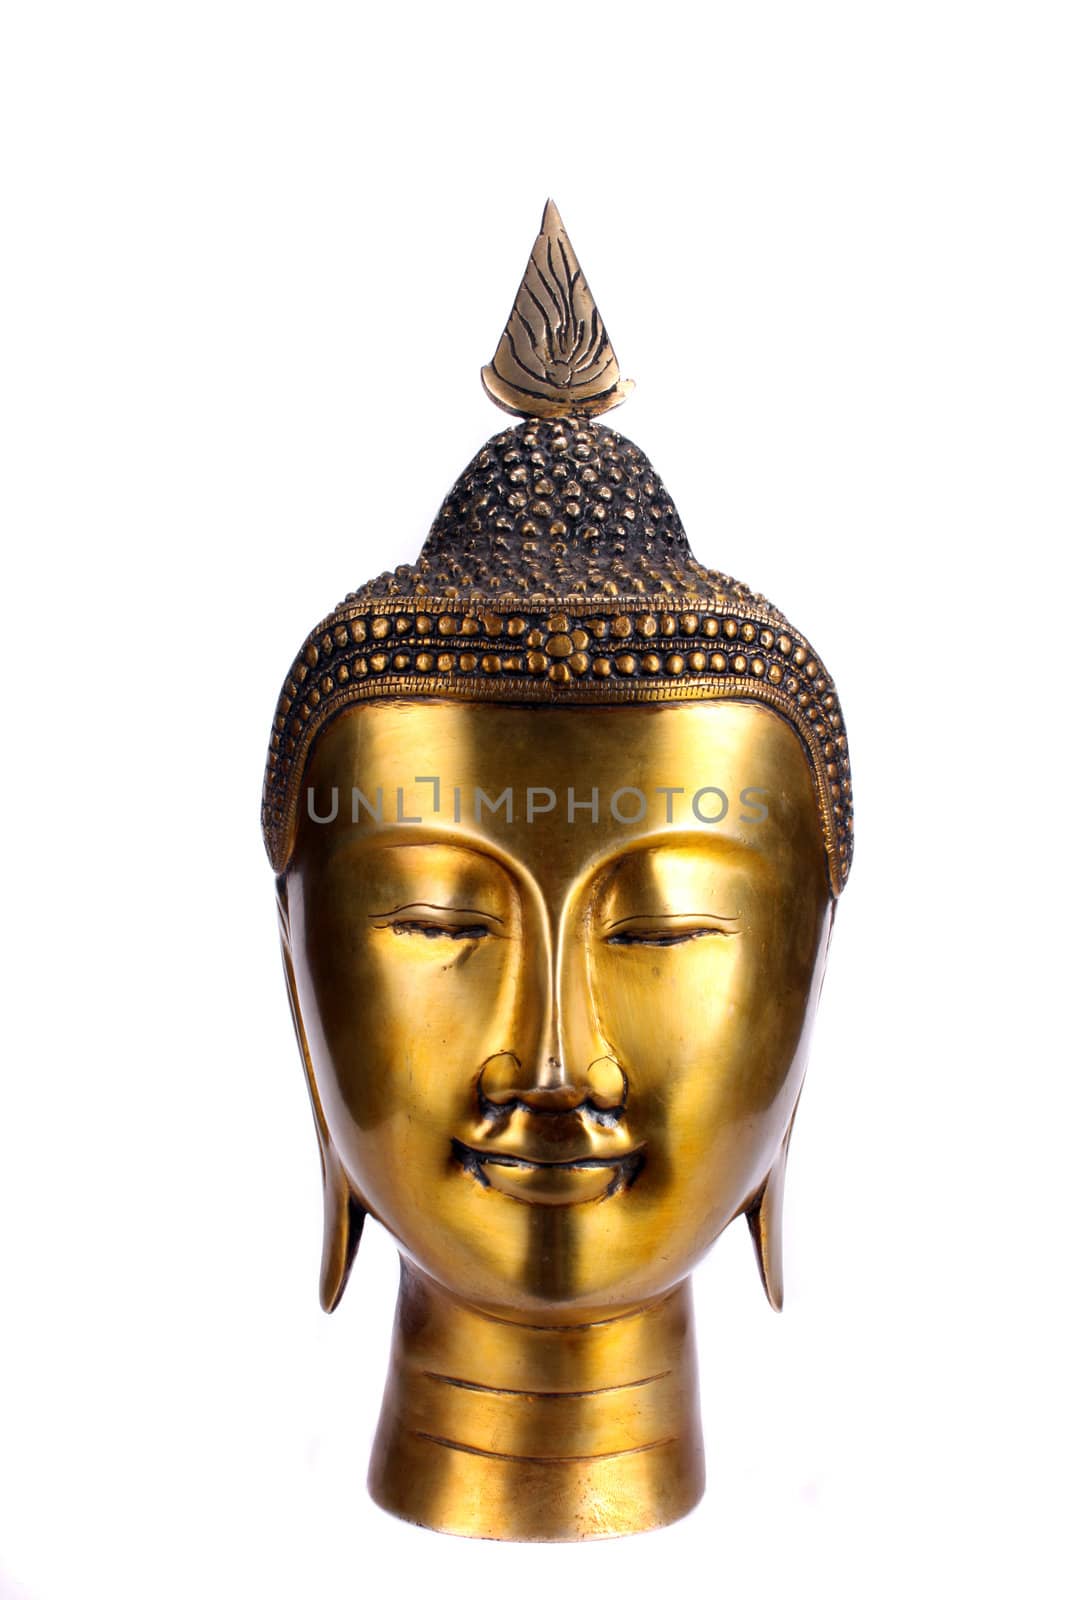 Antique Buddha by thefinalmiracle